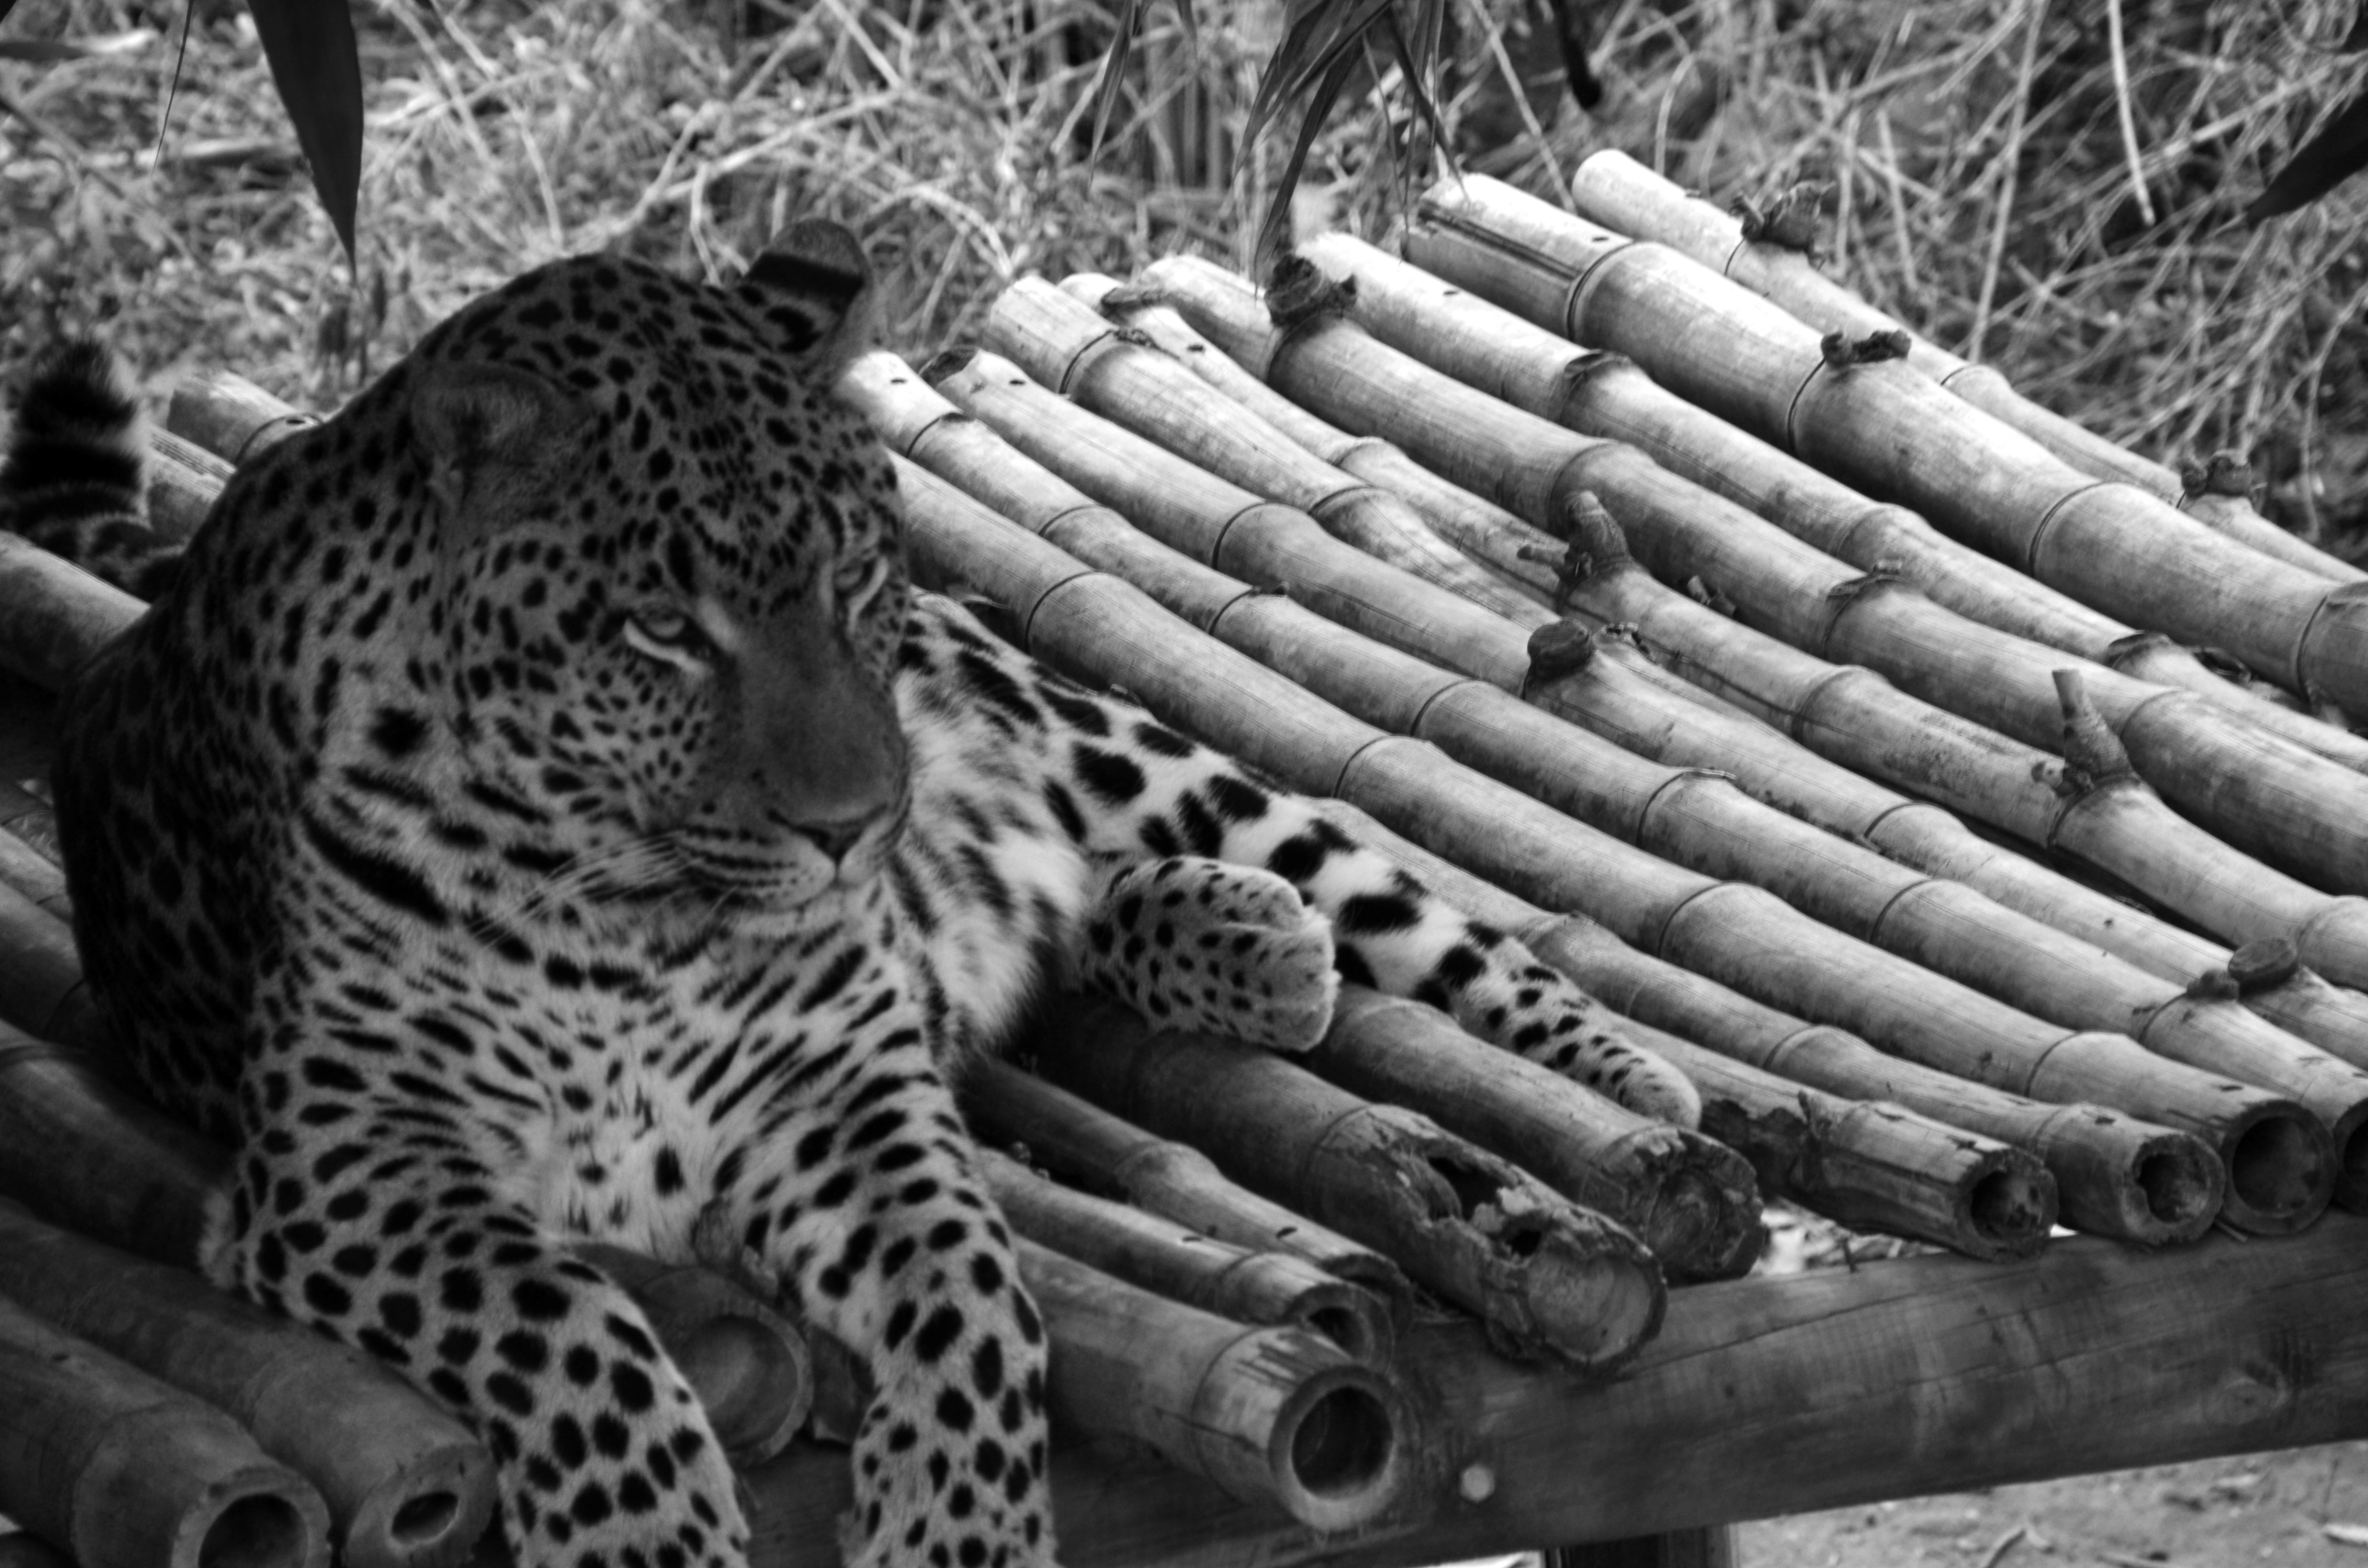 gray scale photograpy of animal near bamboo trunks